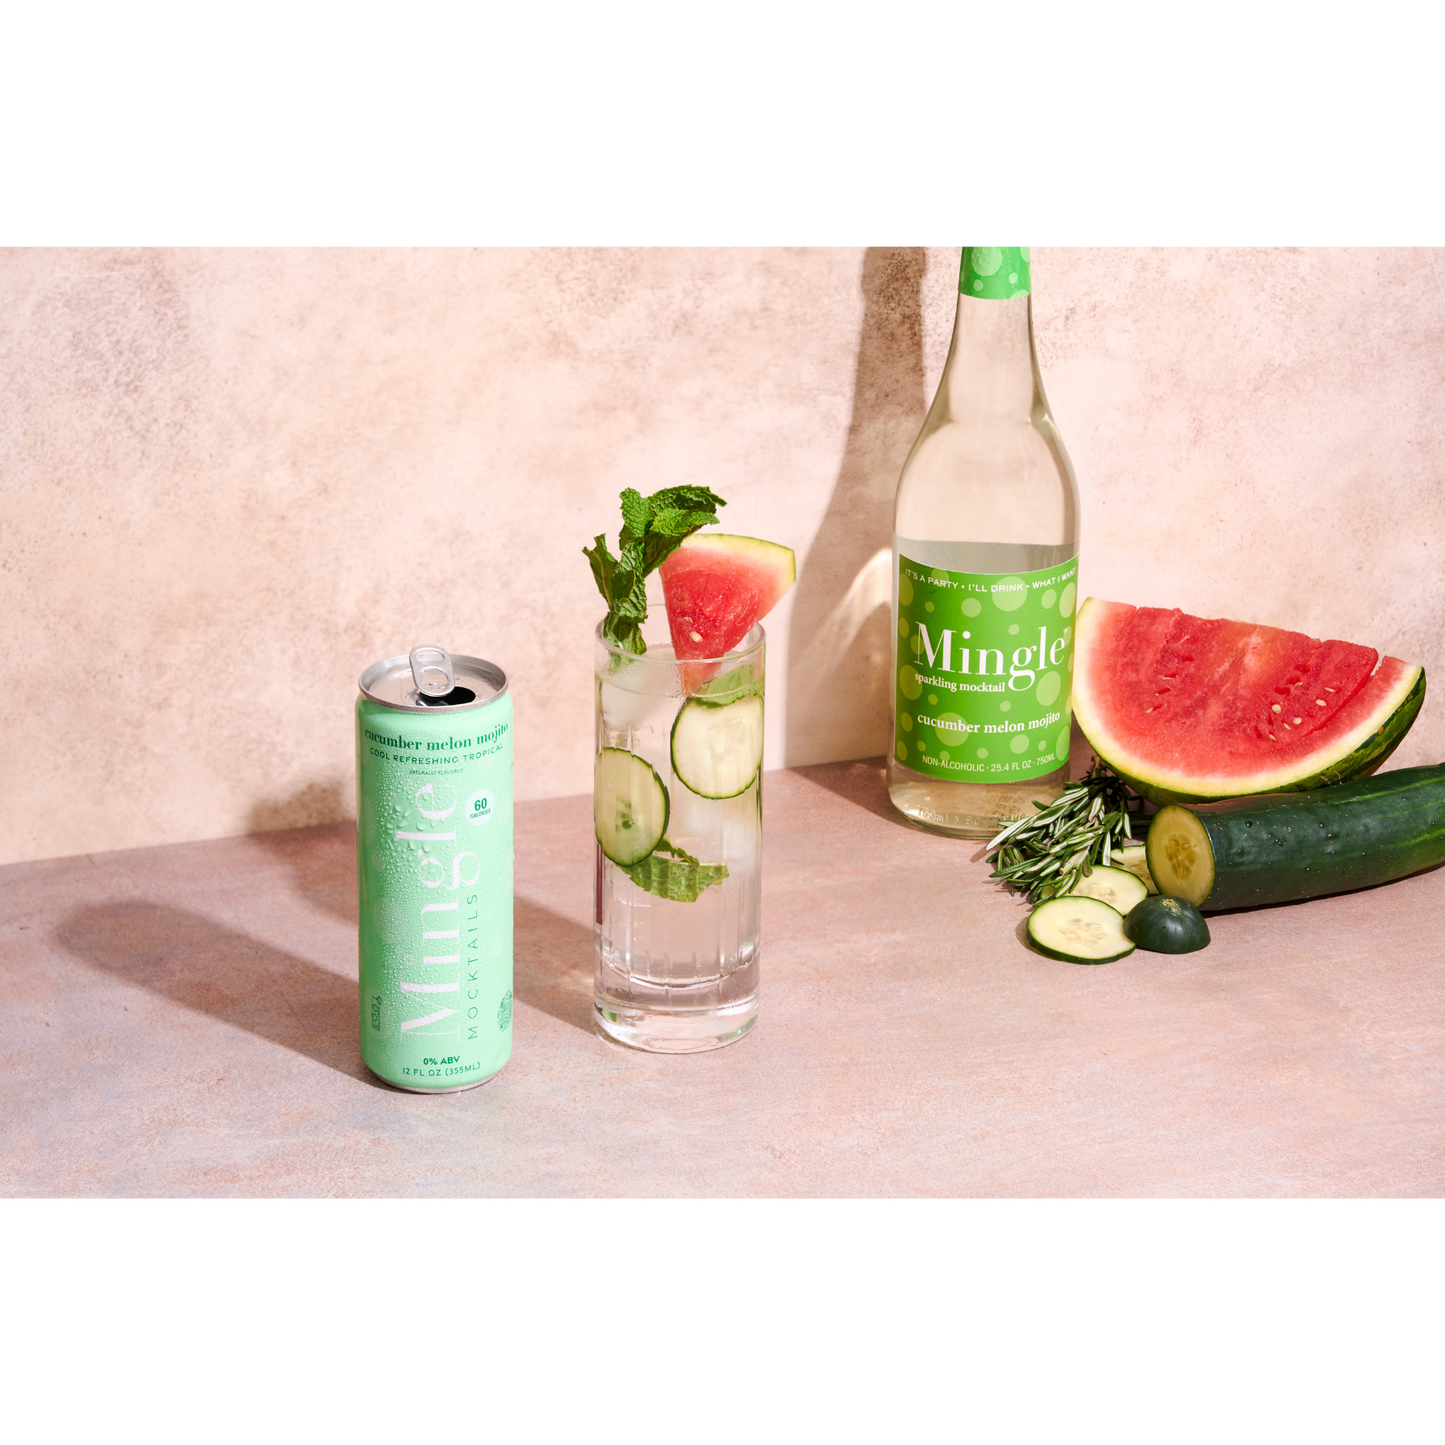 Cucumber Melon Mojito by Mingle Mocktails - Non Alcoholic Beverages